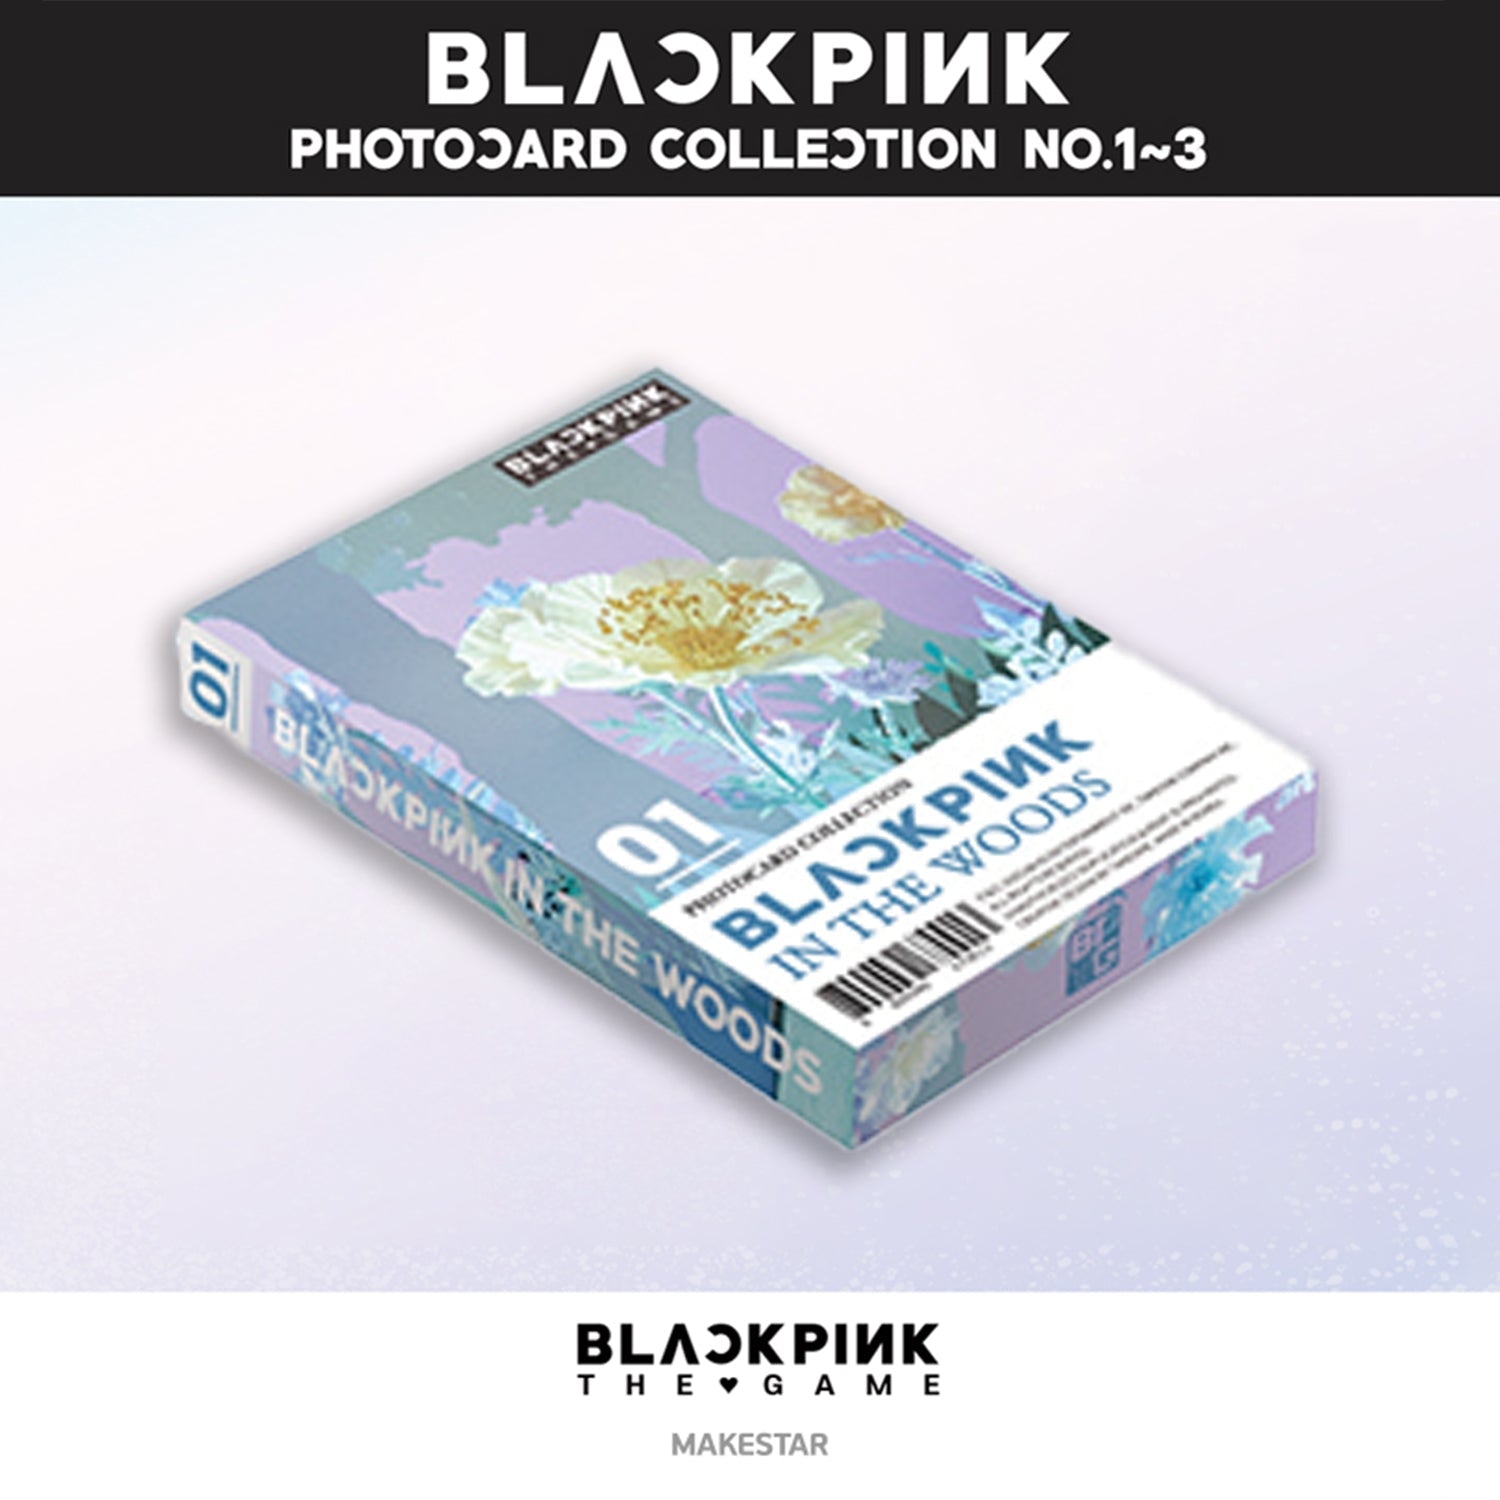 BLACKPINK THE GAME O.S.T. (PHOTOCARD COLLECTION) VERSION 1 COVER